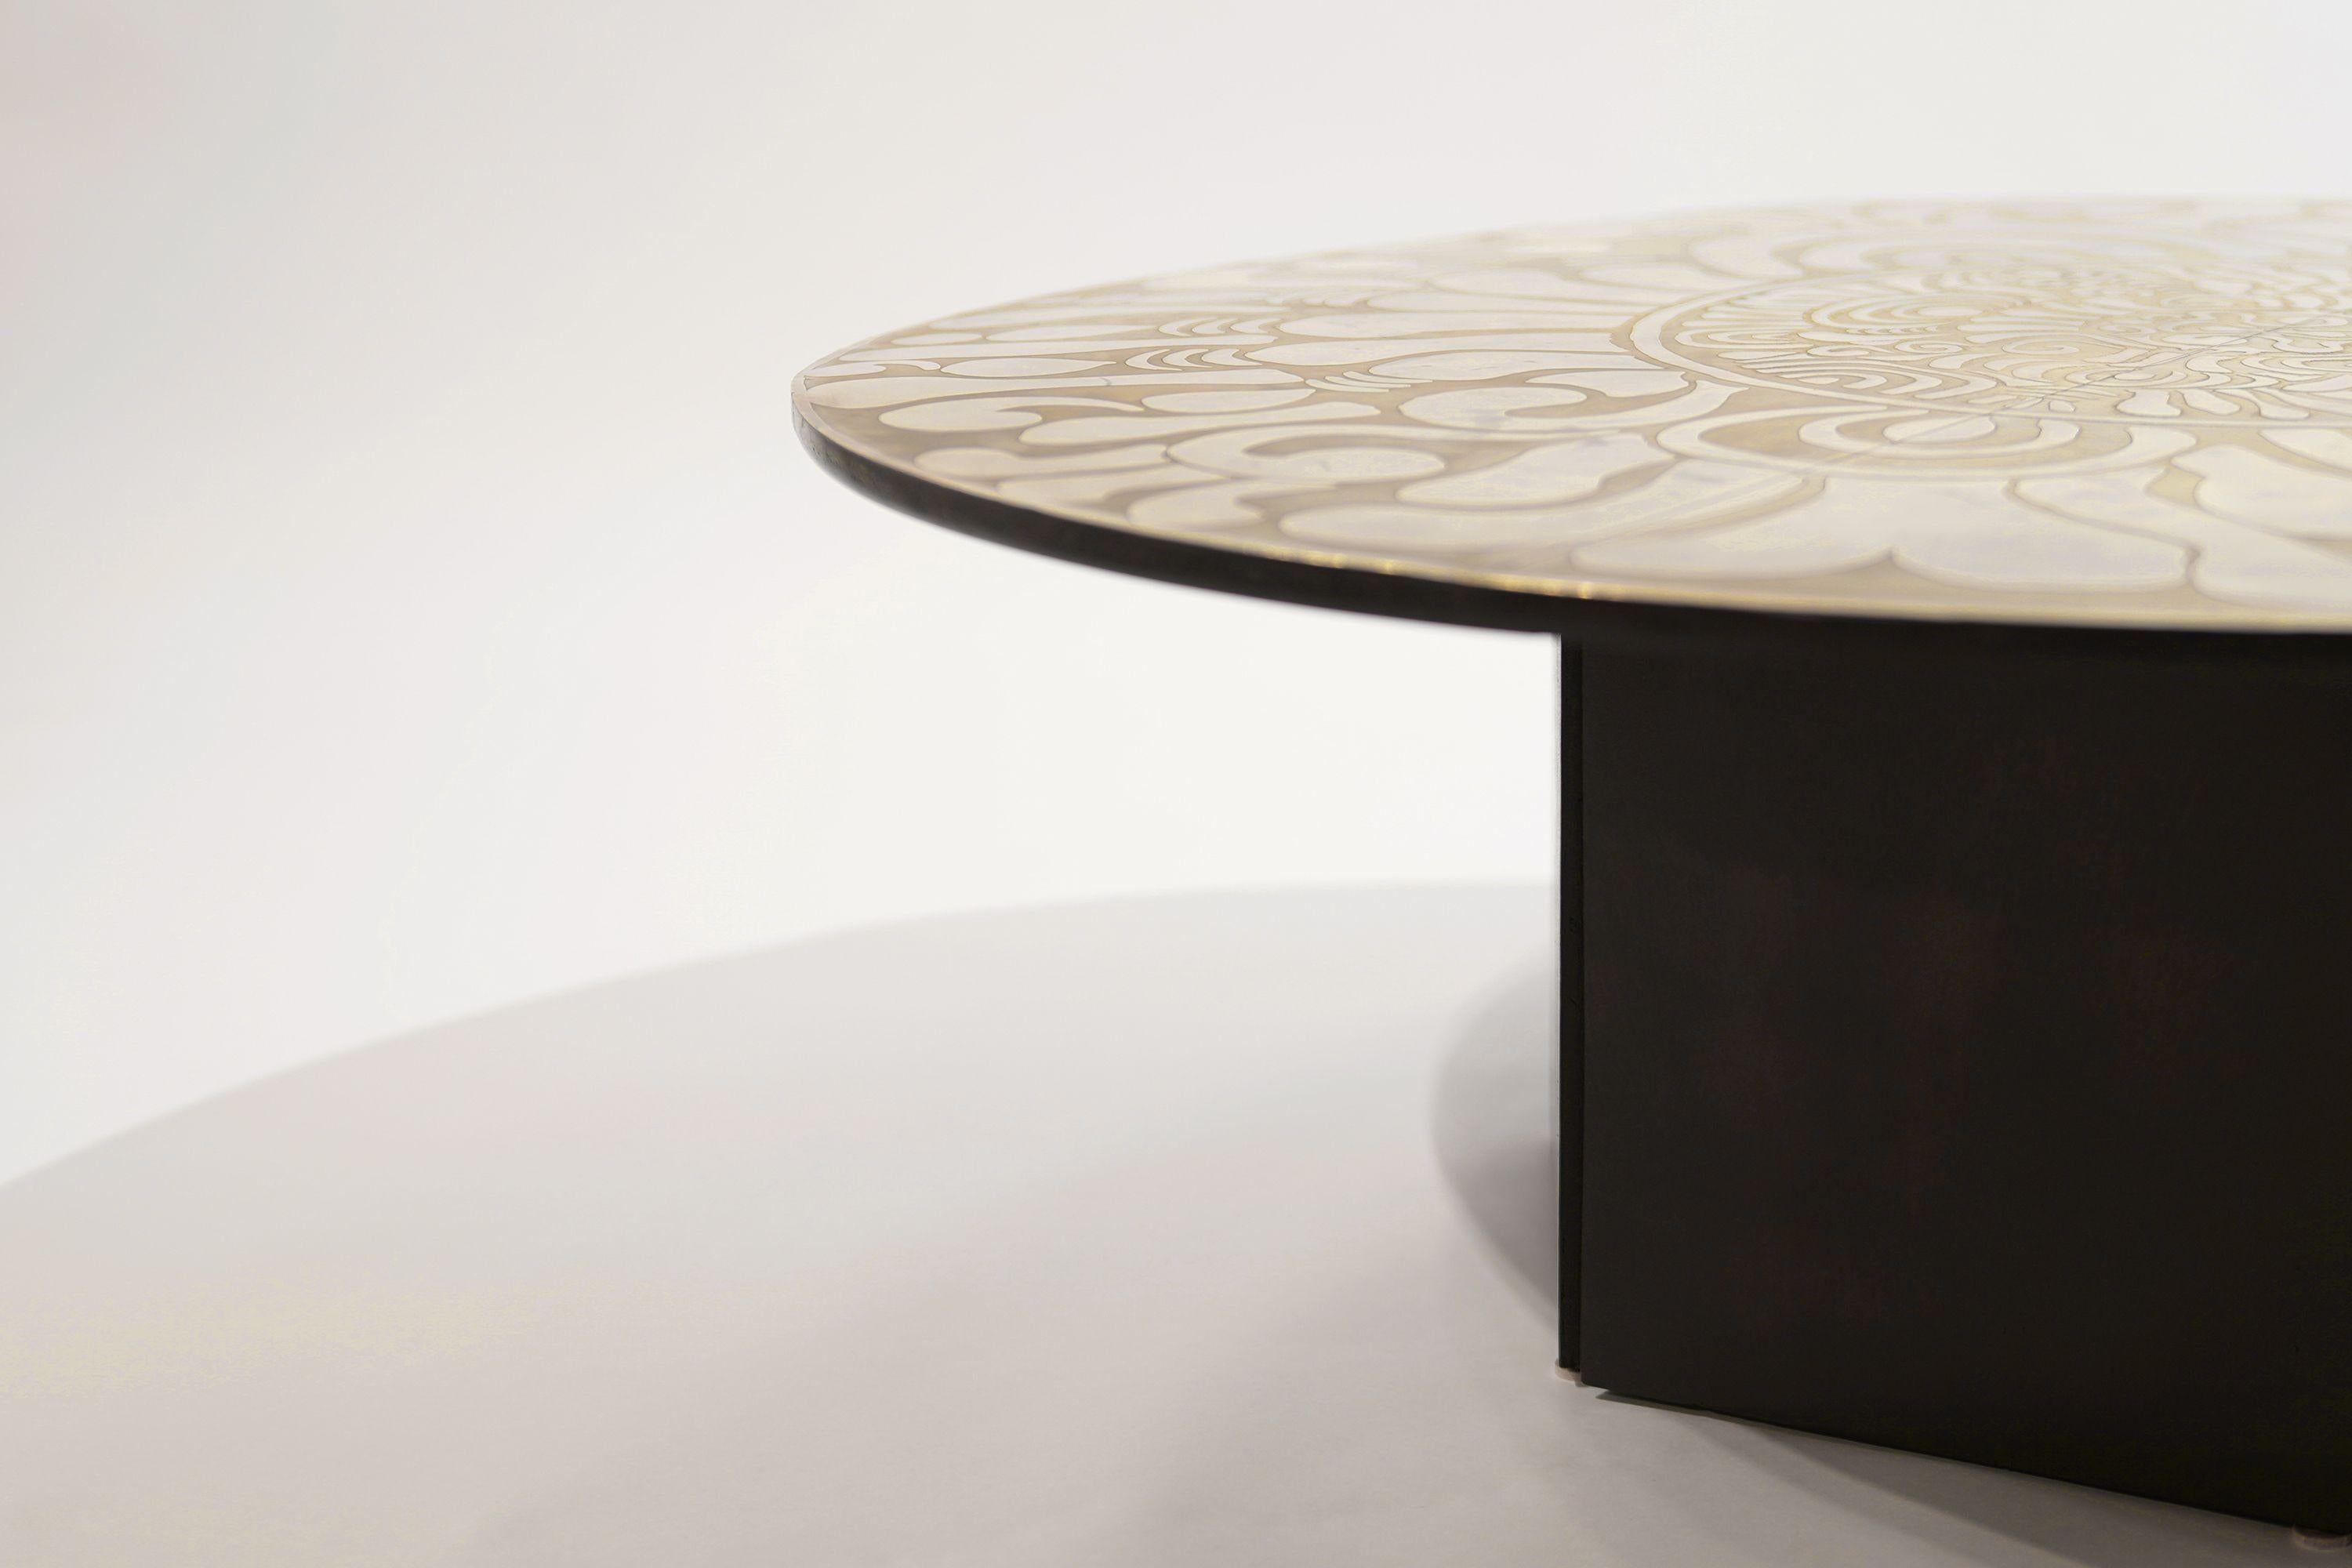 20th Century Etched Brass Coffee Table by Enviene M. Barbara Parker, 1965